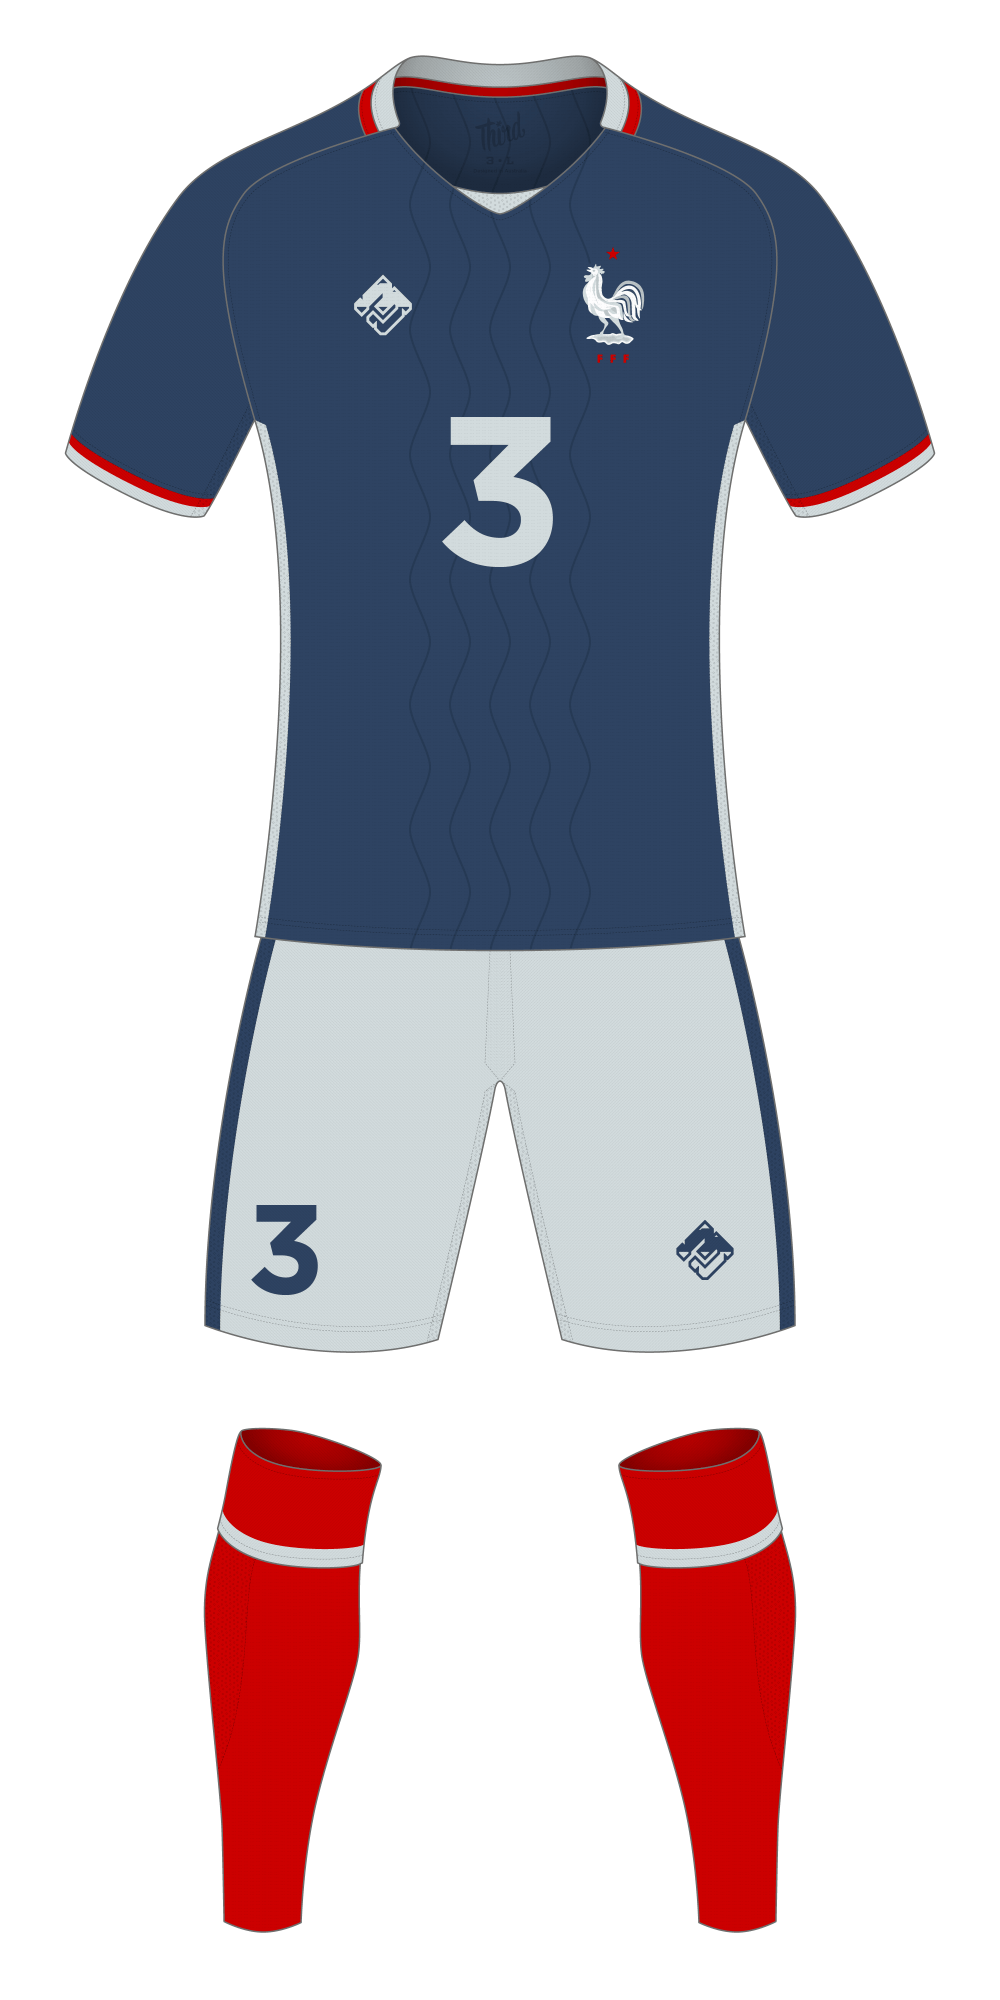 France World Cup 2018 concept